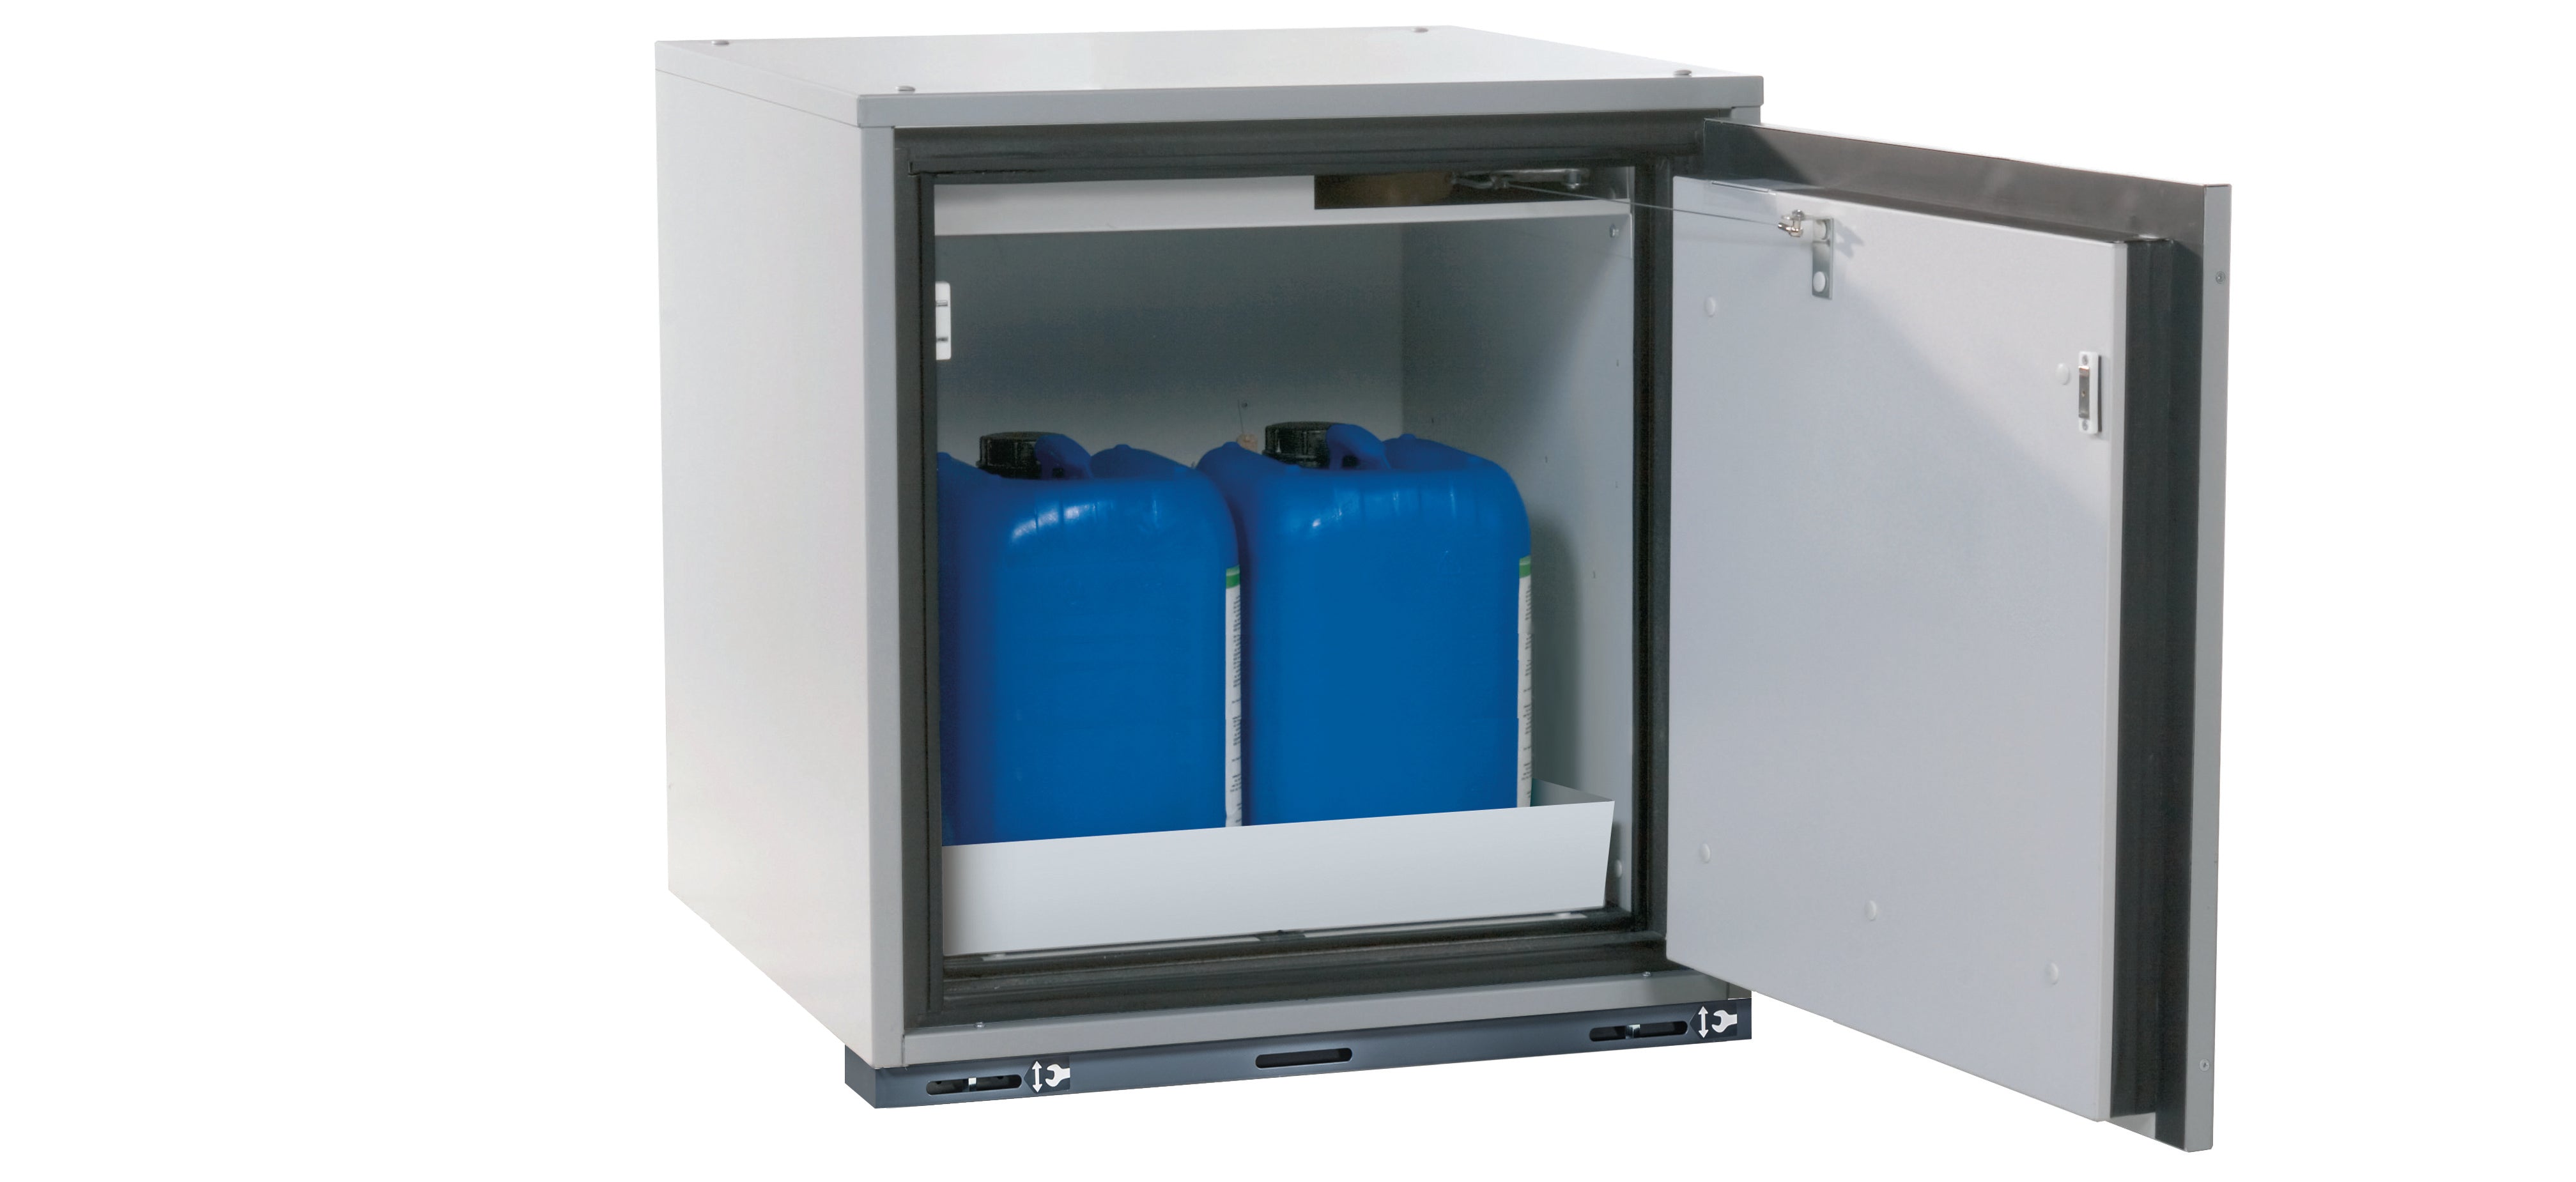 Type 90 safety base cabinet UB-T-90 model UB90.060.059.TR in light gray RAL 7035 with 1x perforated sheet metal insert standard (sheet steel)